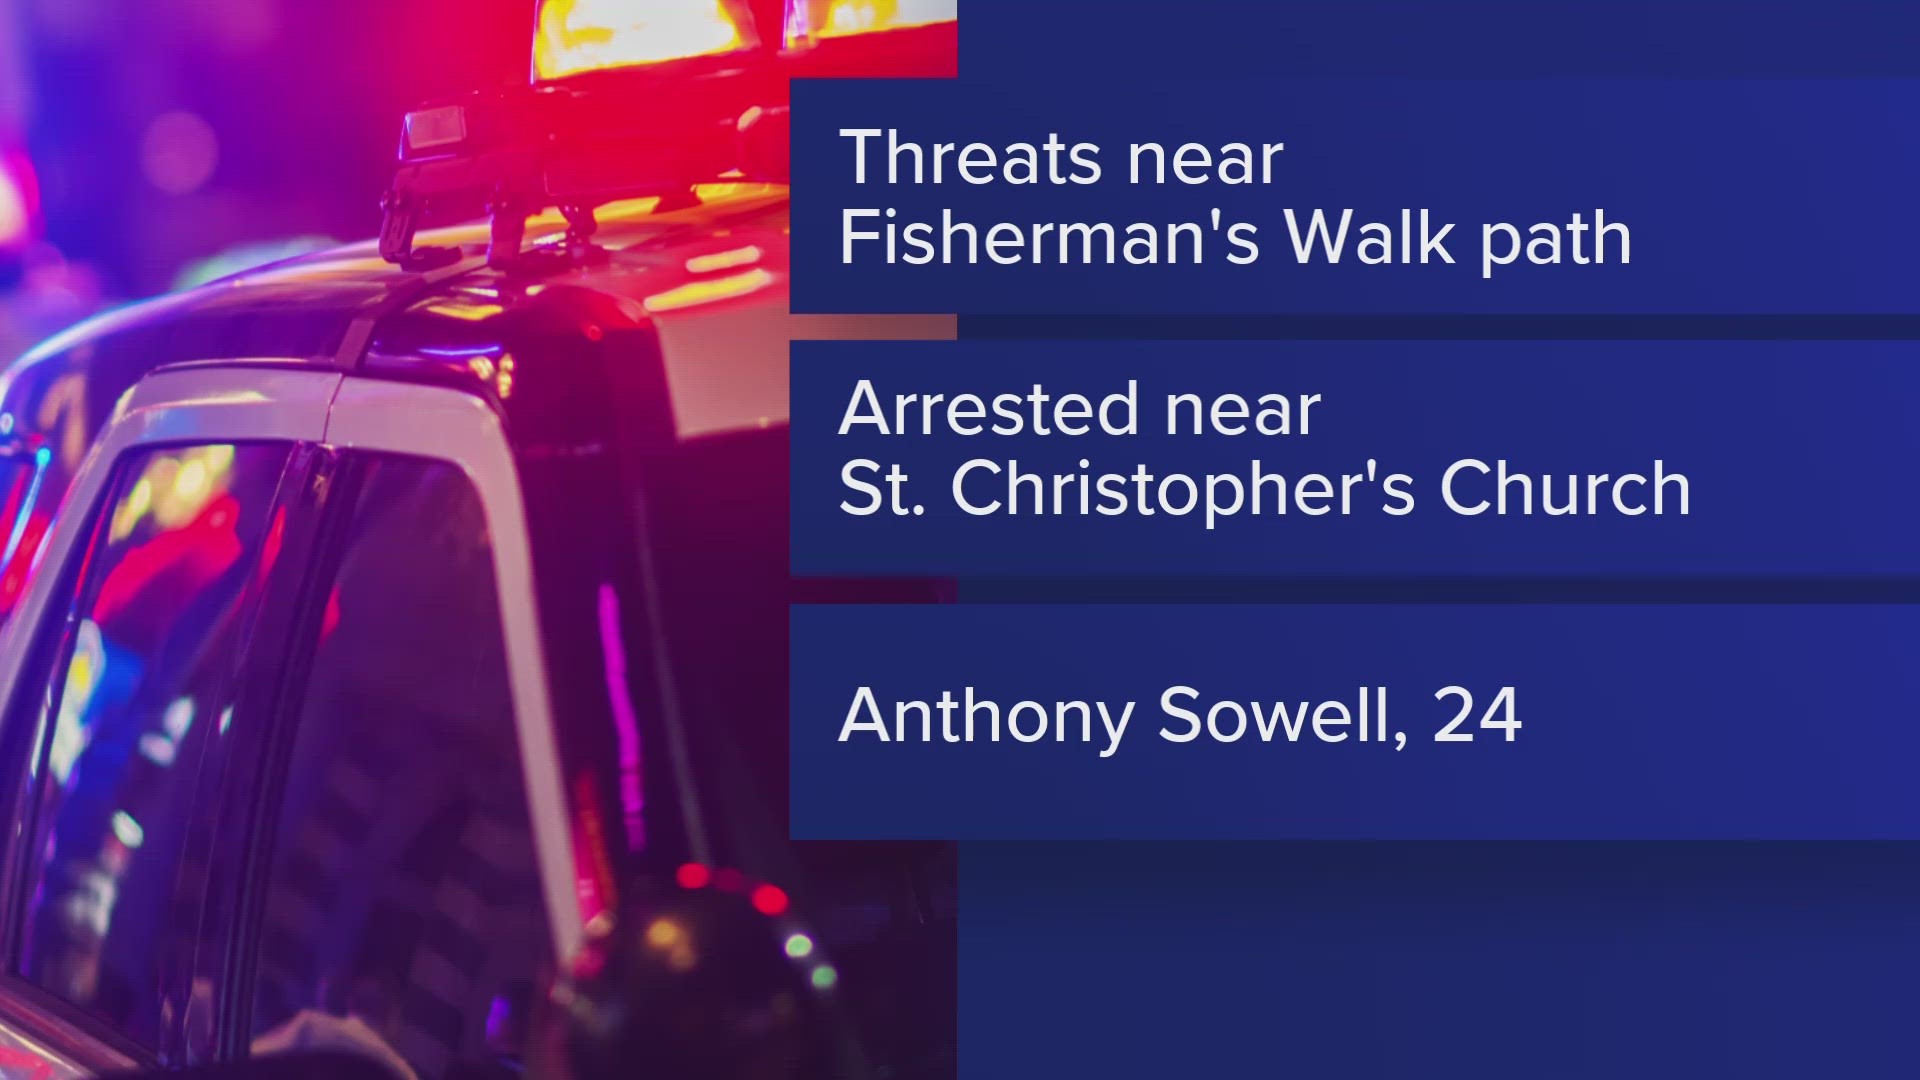 Police arrested Anthony Sowell, 24, near St. Christopher's Church.